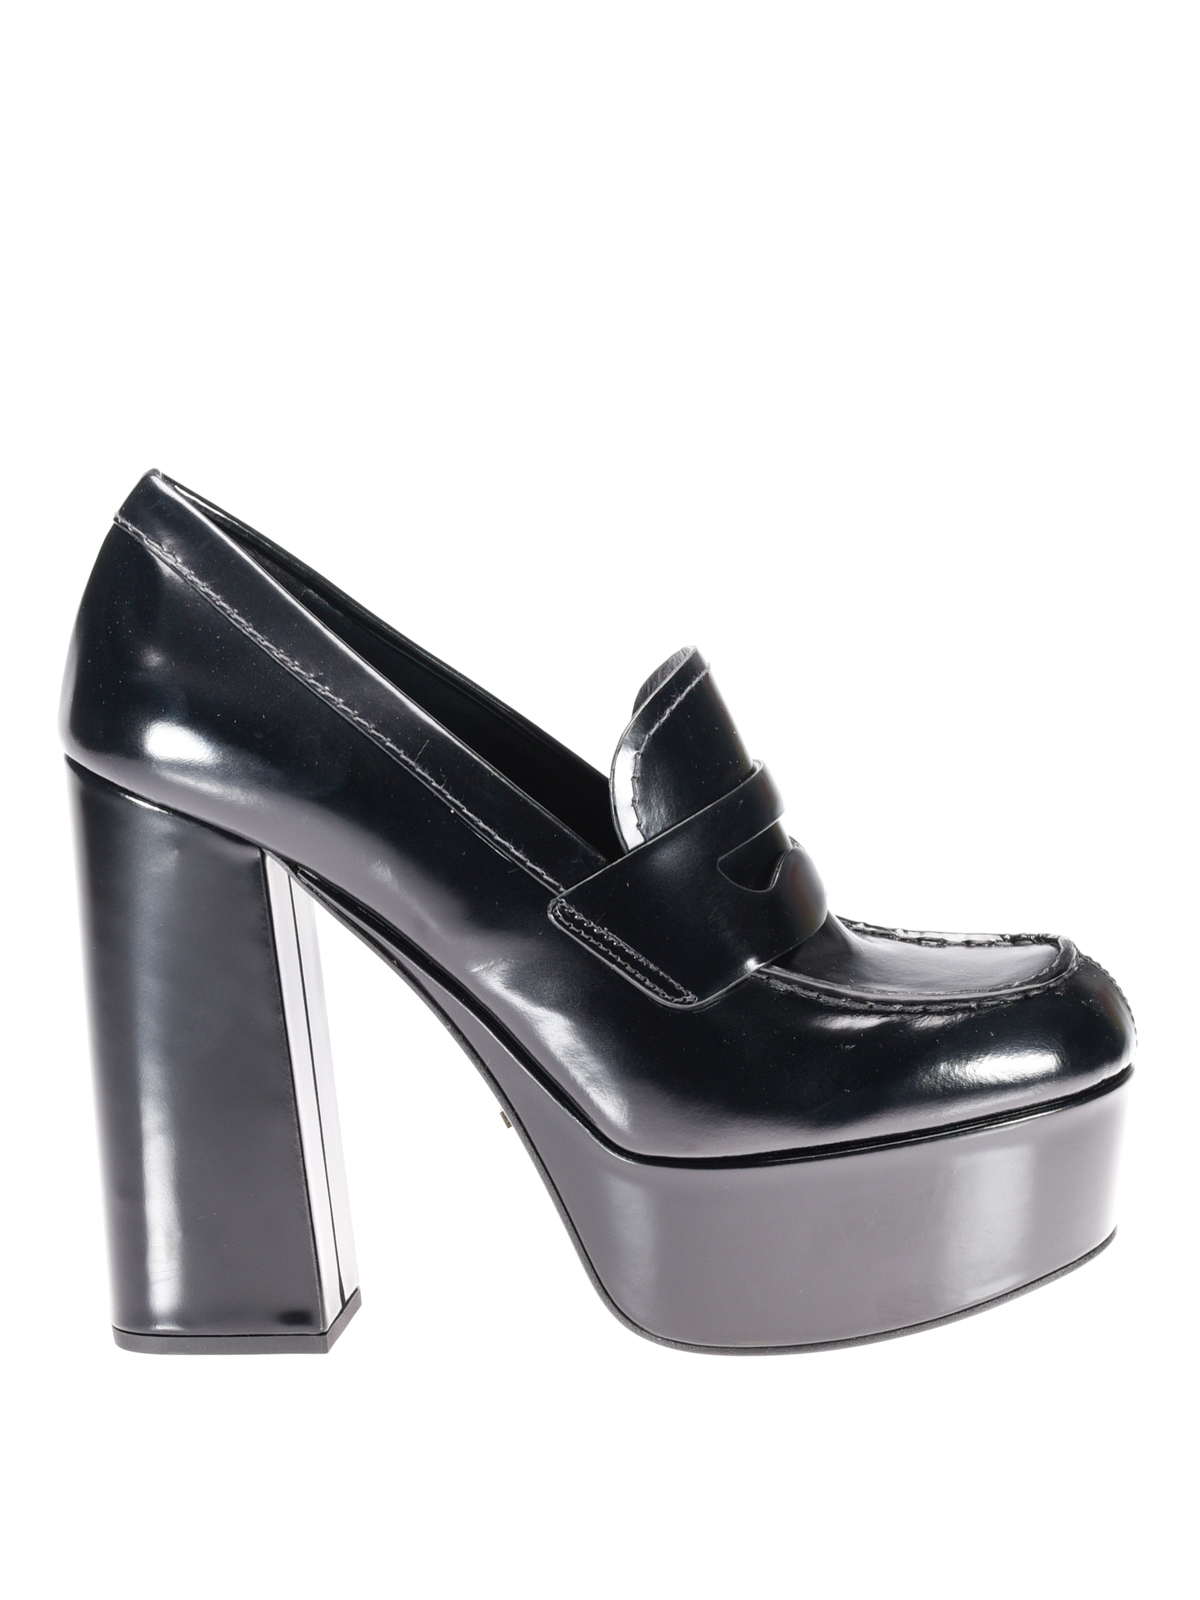 Prada - Loafer-inspired court shoes 